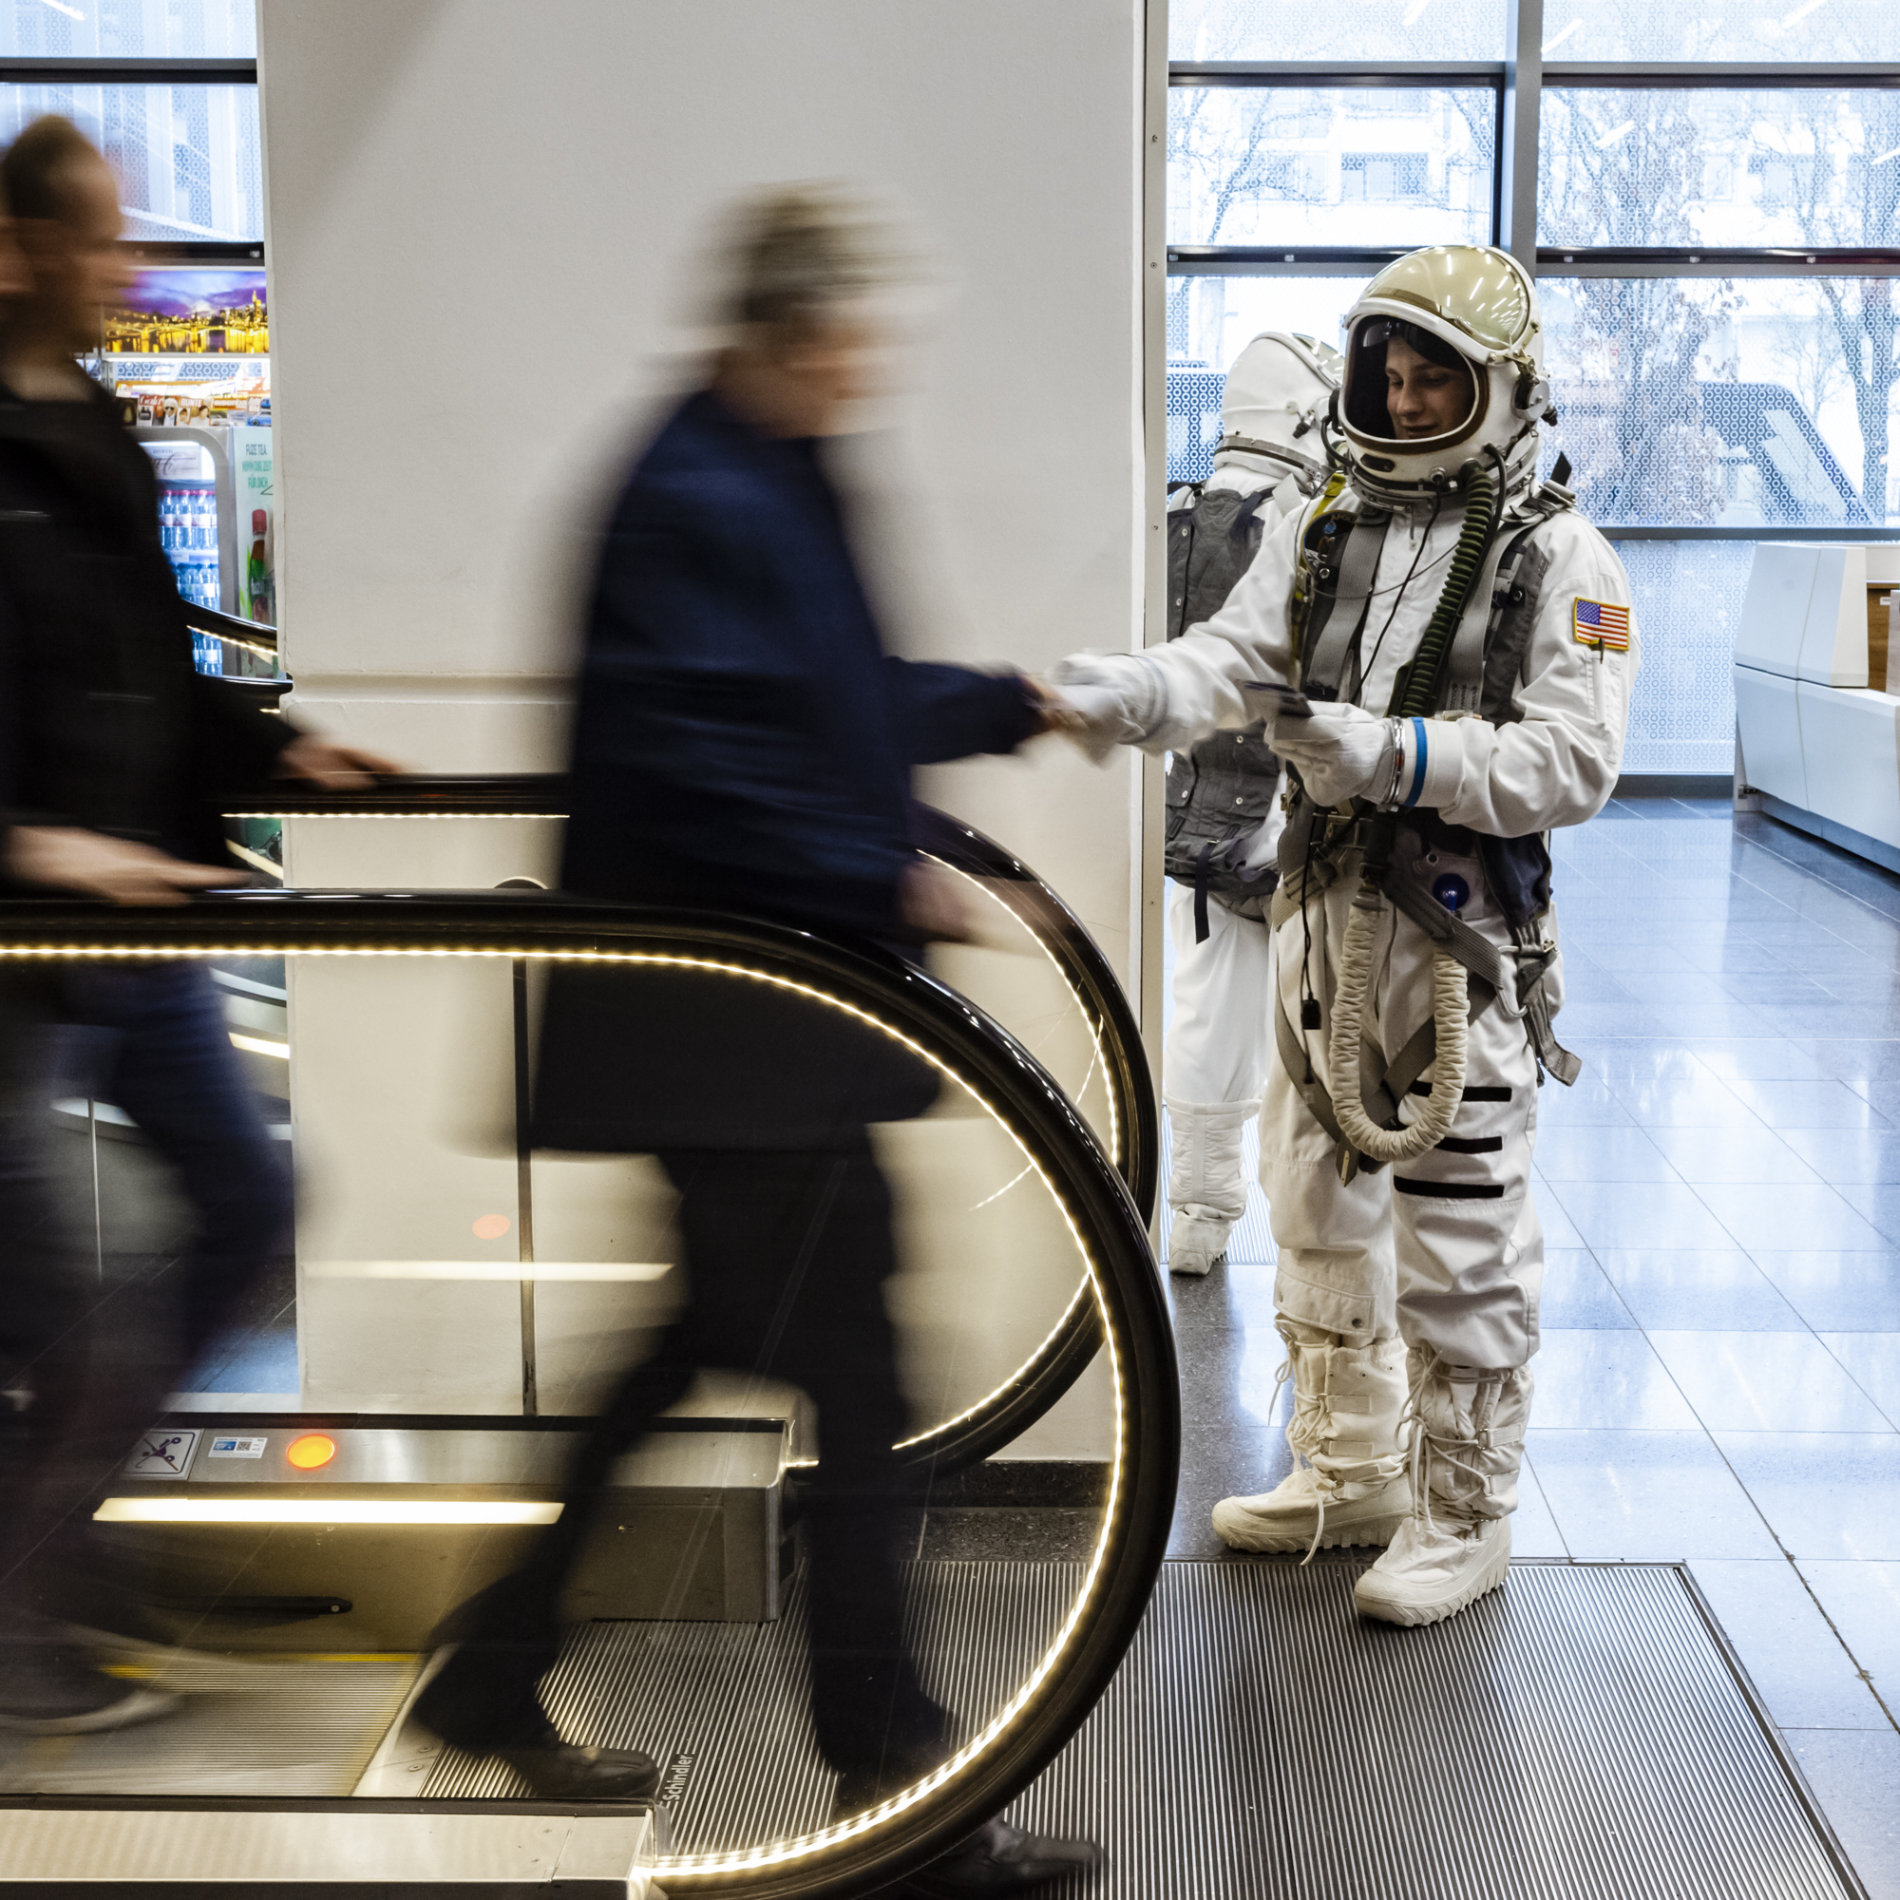 Promotion: Hostess in astronaut suit at Messe Frankfurt